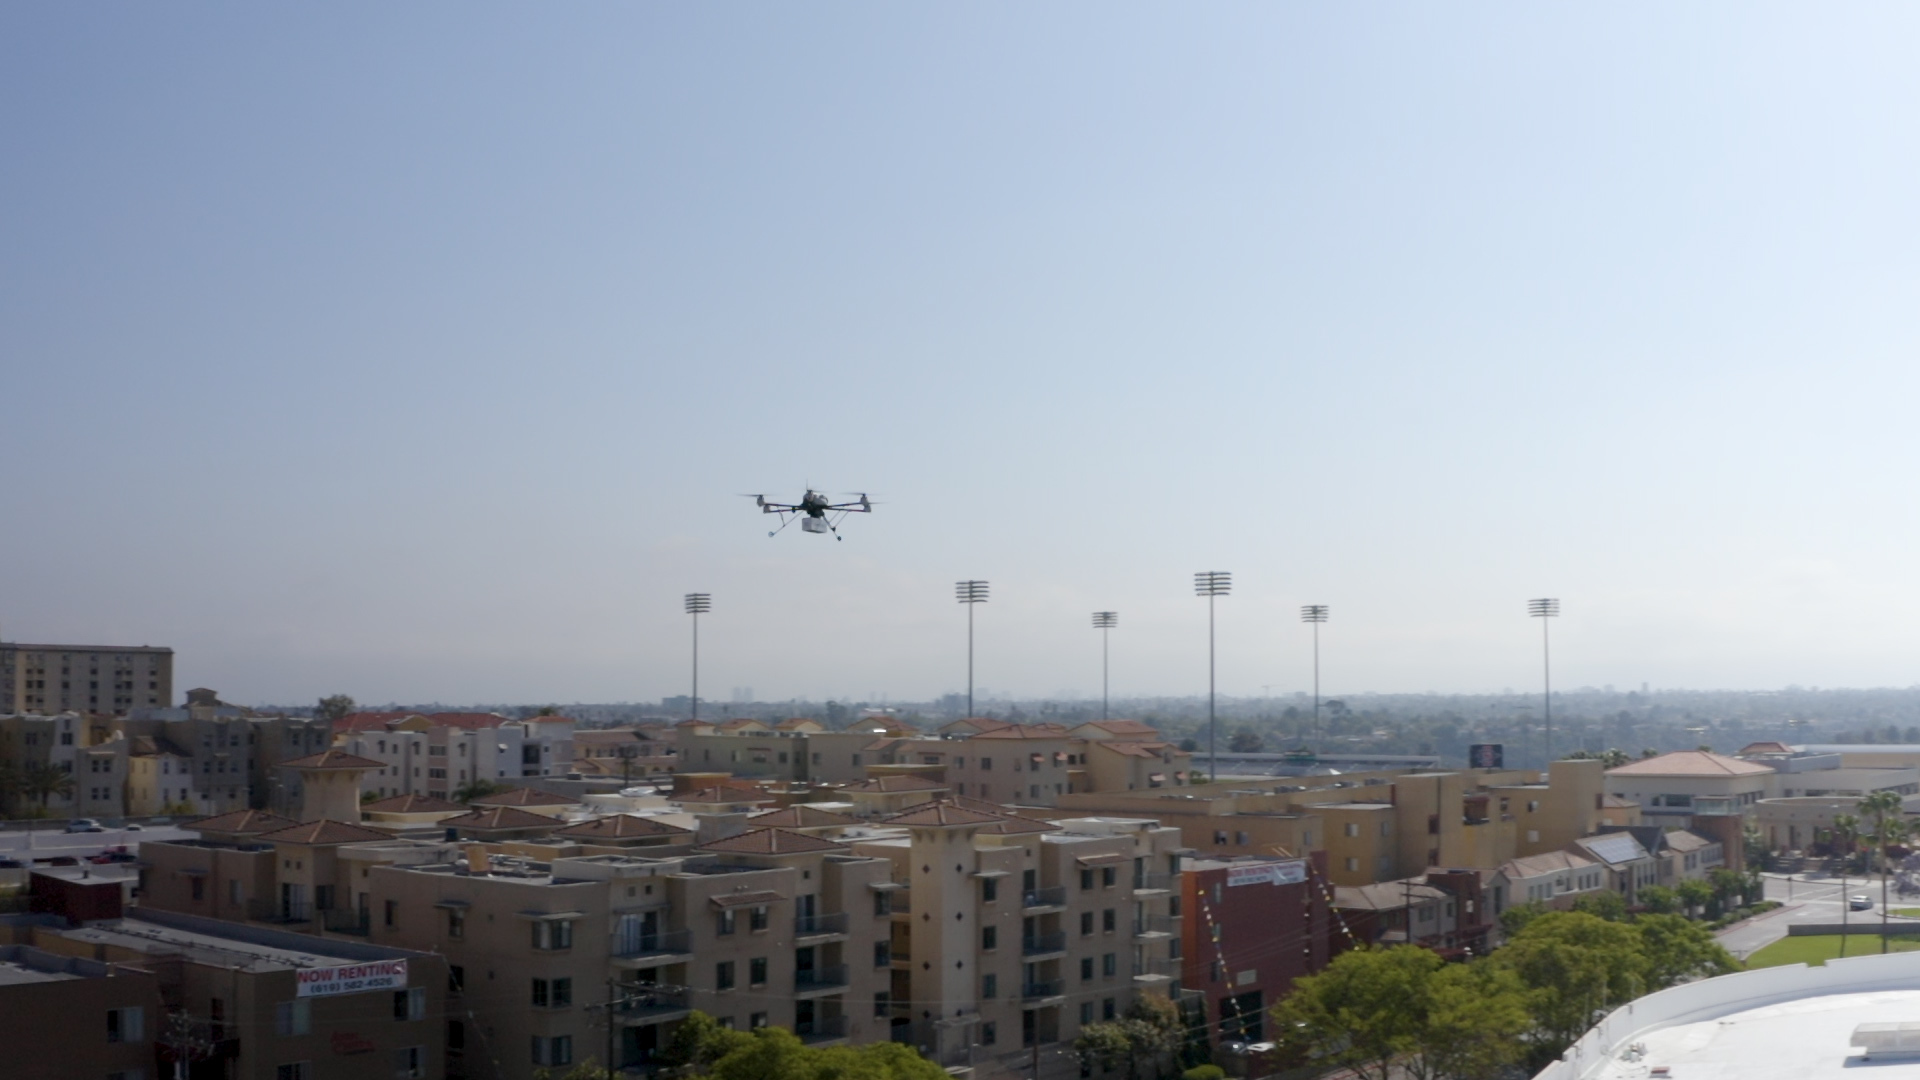 Uber Eats Drone in flight over the University of San Diego